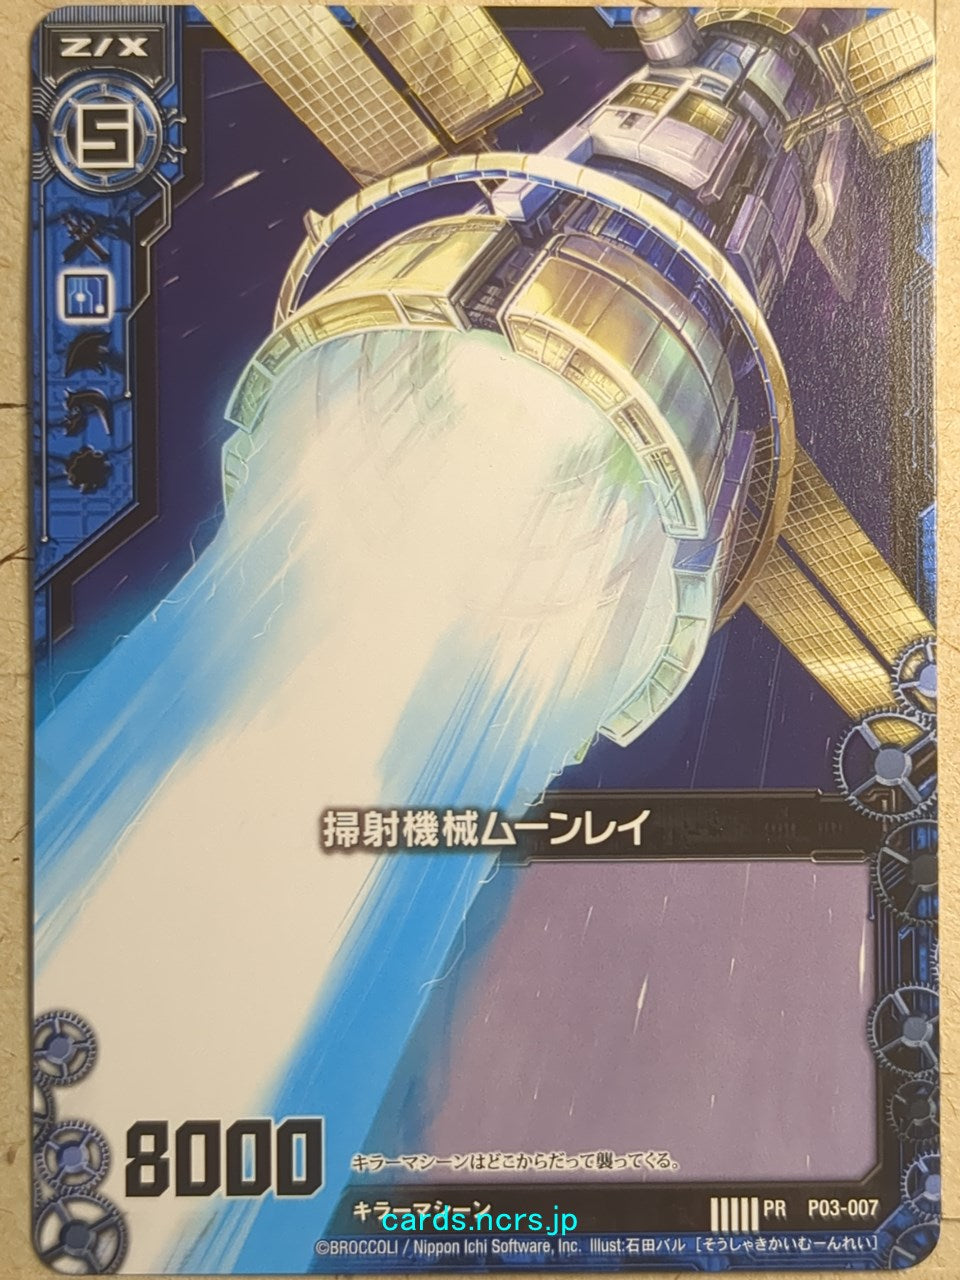 Z/X PR – Page 4 – anime-cards and more